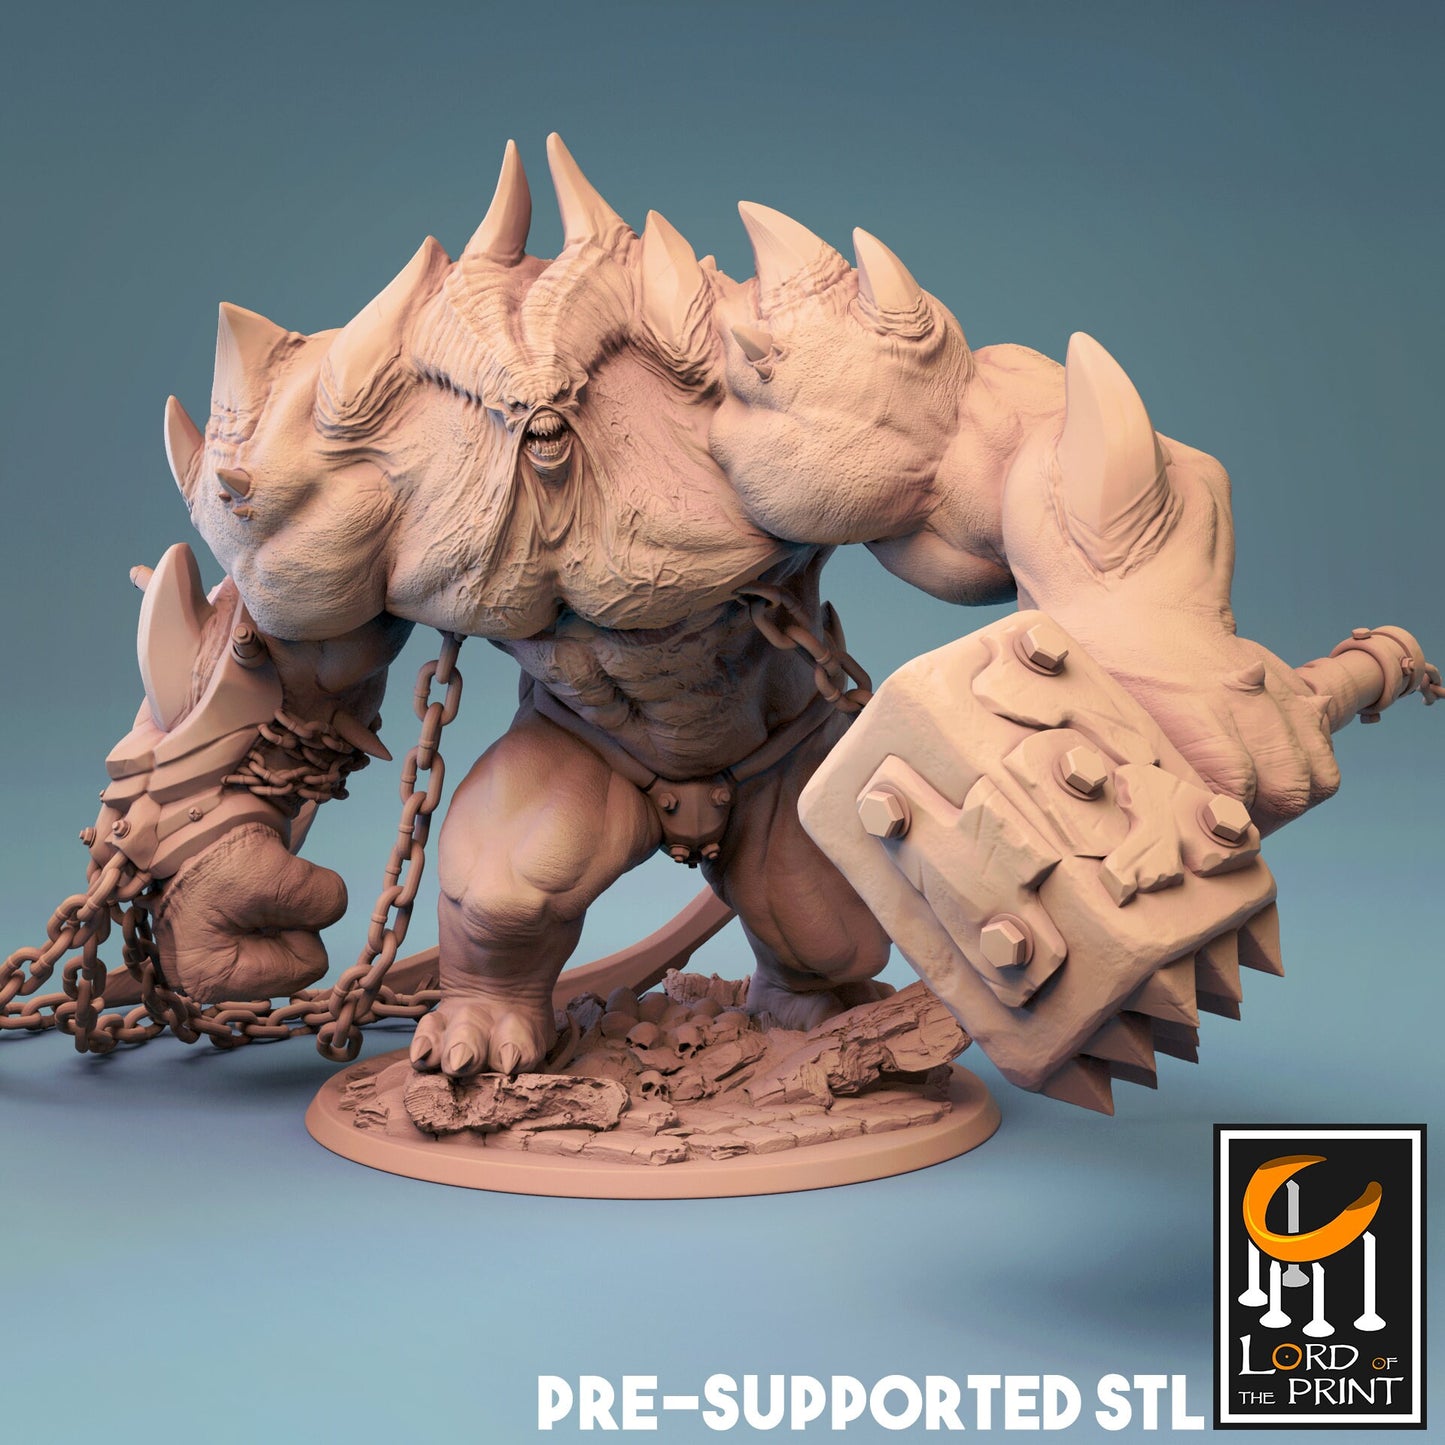 Zombie Behemoth with Hammer Painted Model - Lord of the Print Miniature | Dungeons & Dragons | Pathfinder | Tabletop